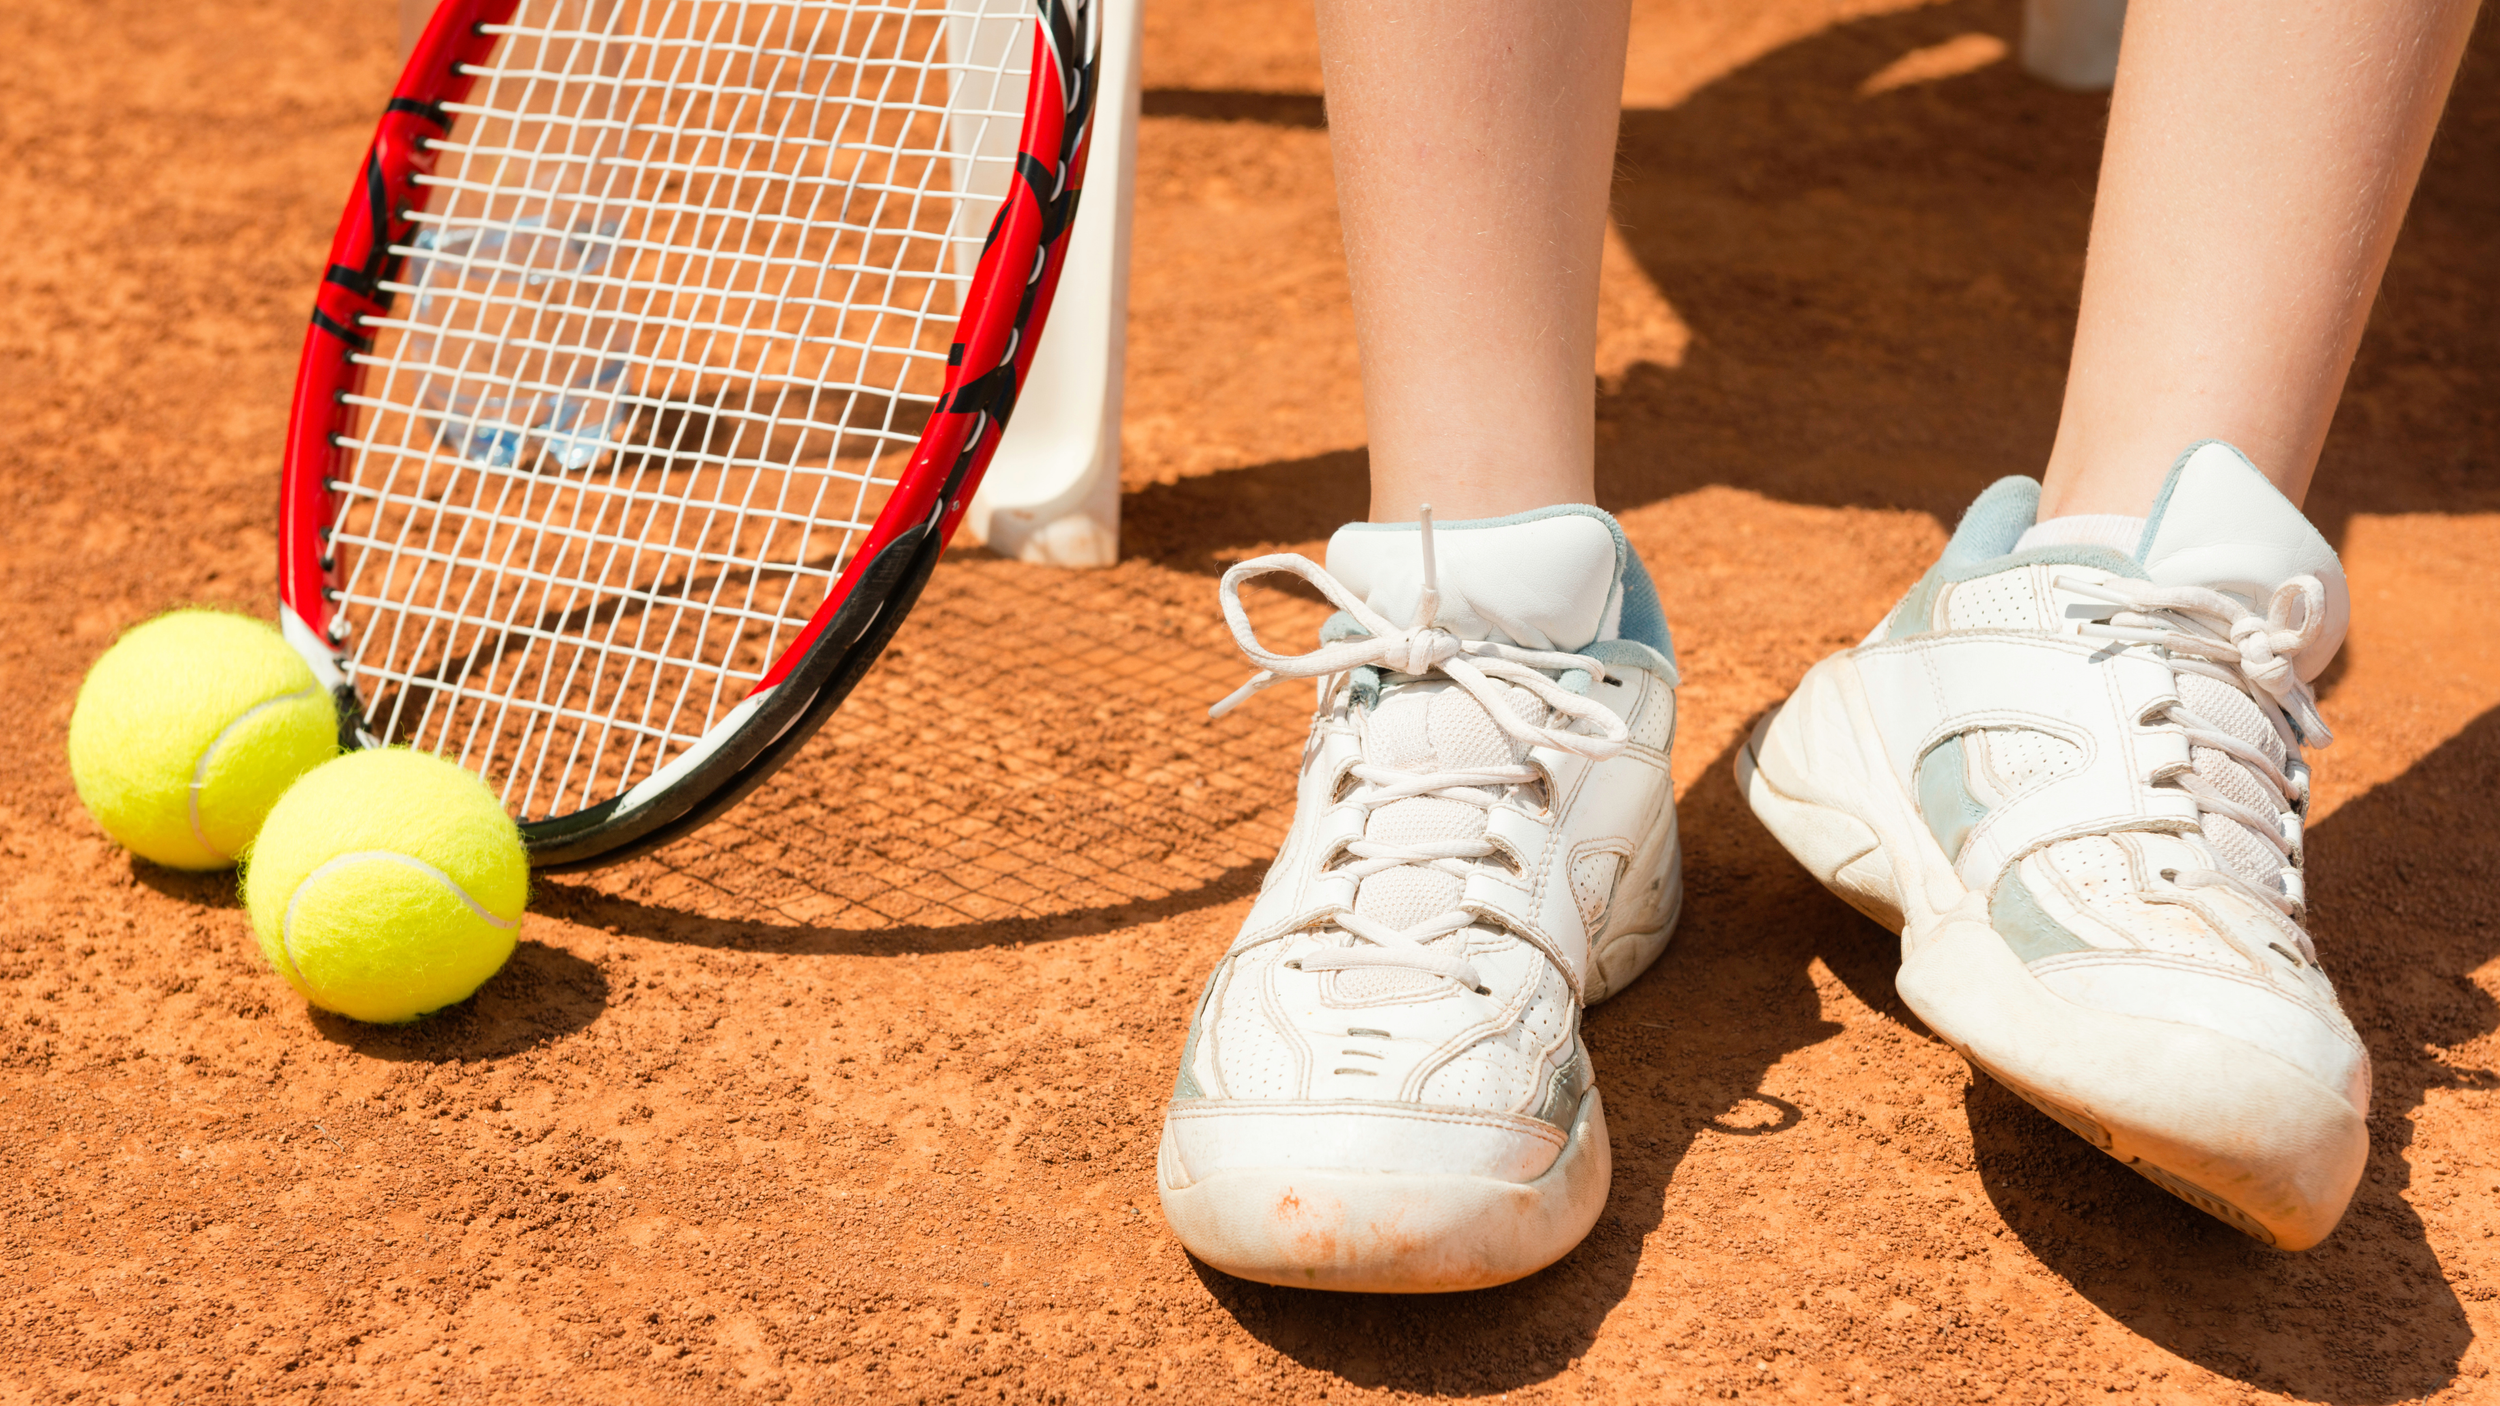 Shopping for Ideal Badminton Shoes: Choose Wisely to Play well